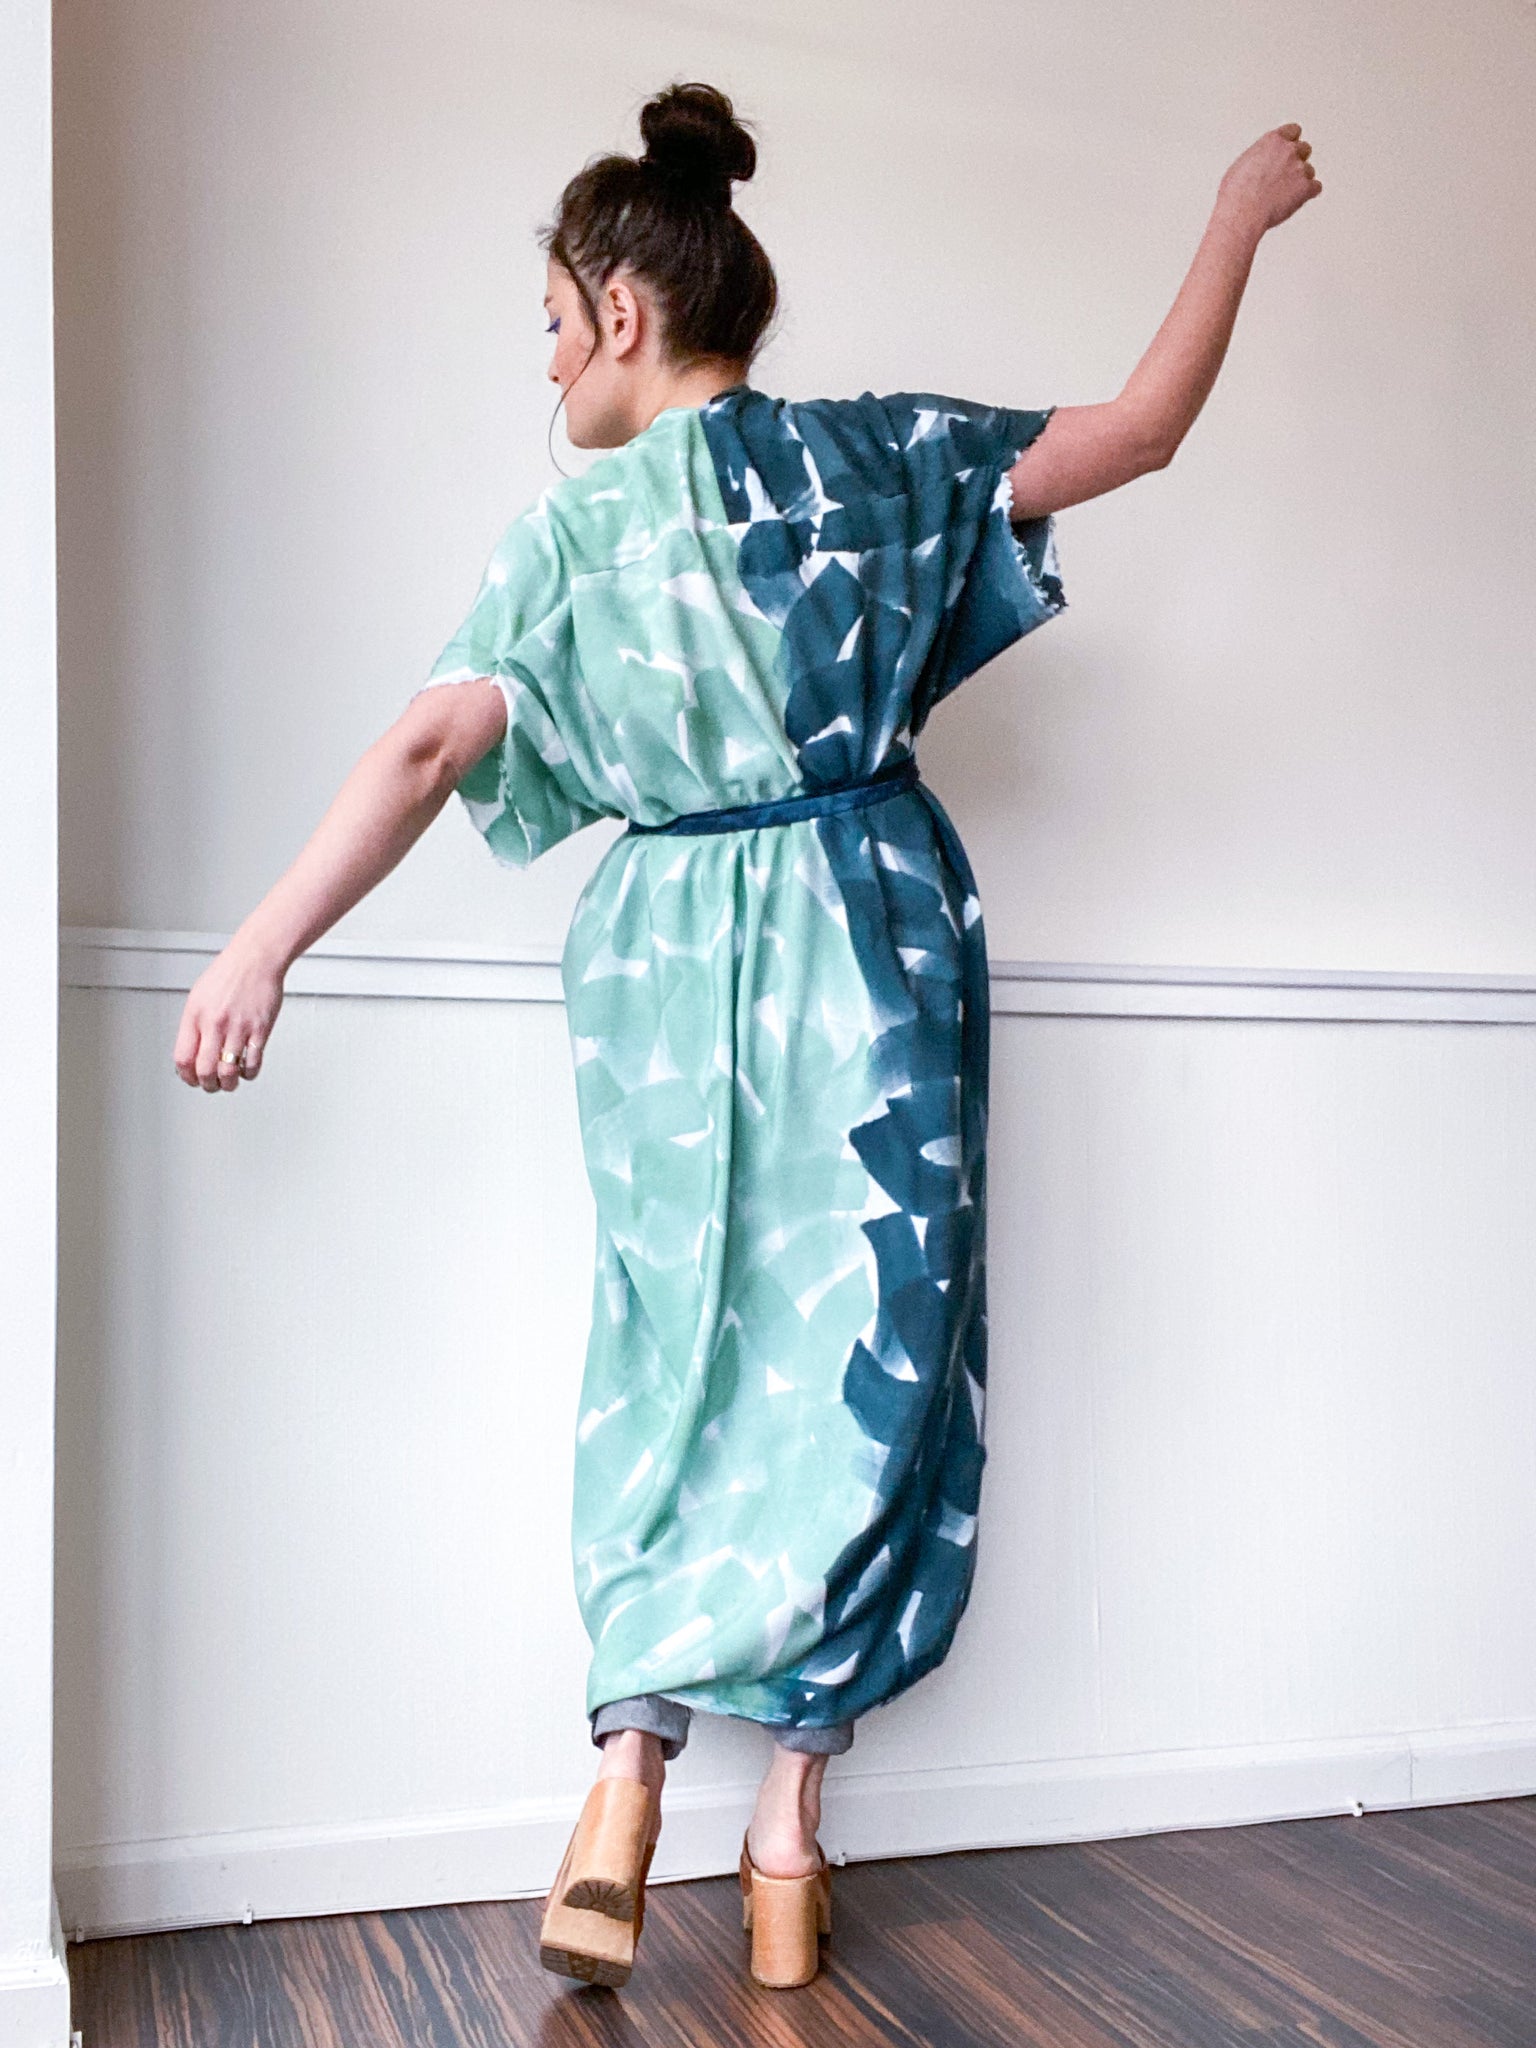 Limited Edition Hand-Dyed High Low Kimono Celadon Teal